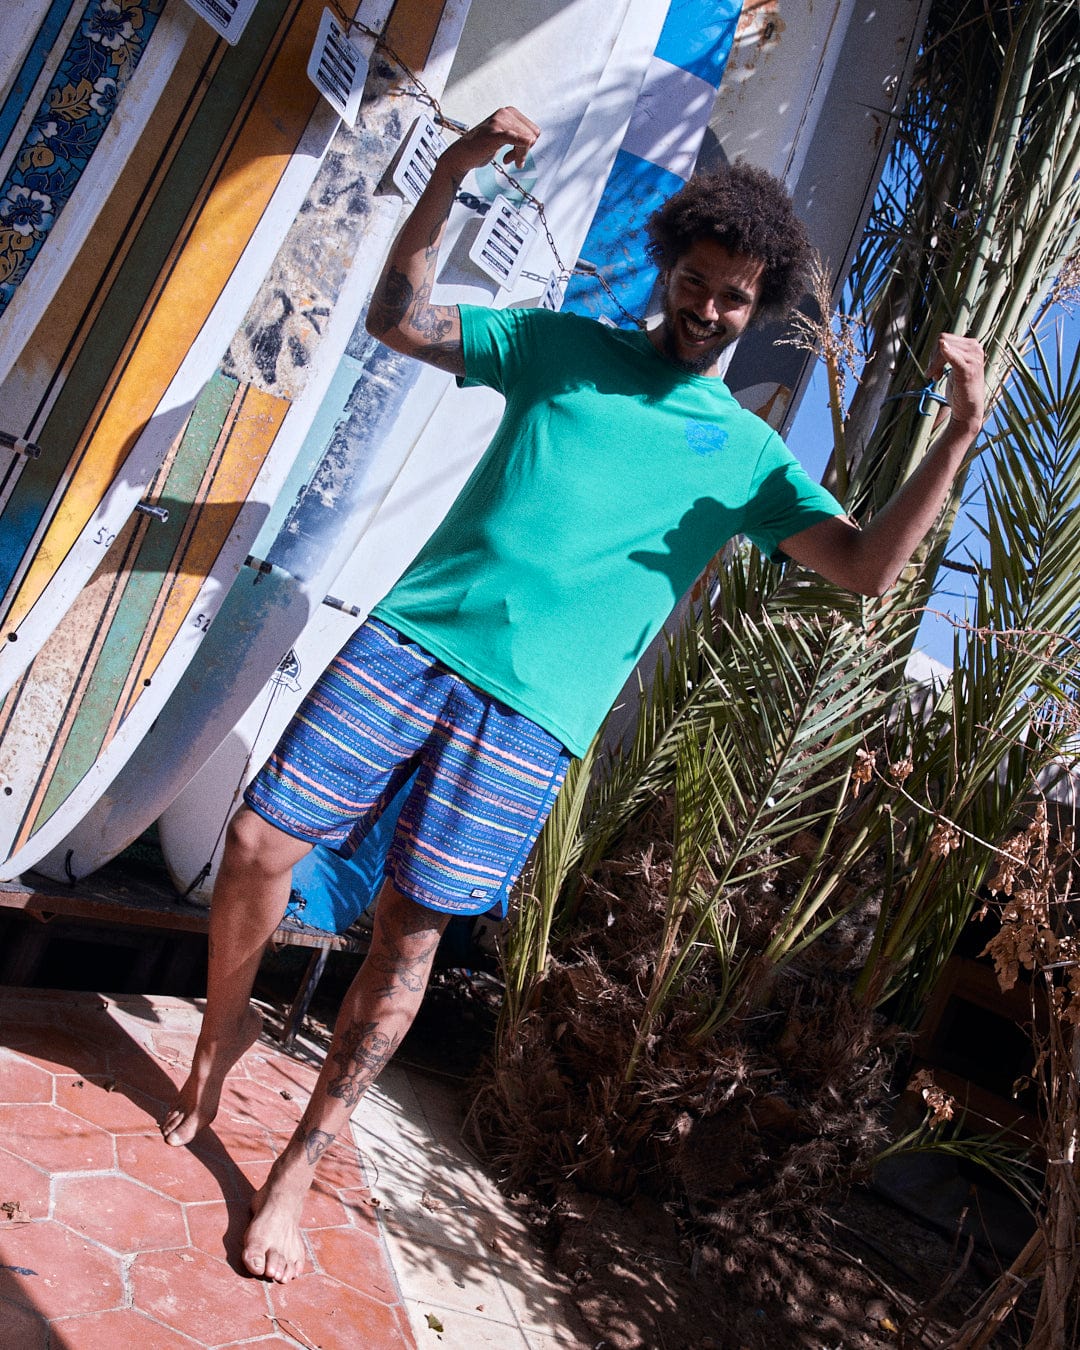 A joyful man in a green shirt and Saltrock Silas Mens Boardshorts in Blue Stripe made from Repreve recycled material jumps excitedly near a rack of surfboards and palm plants.